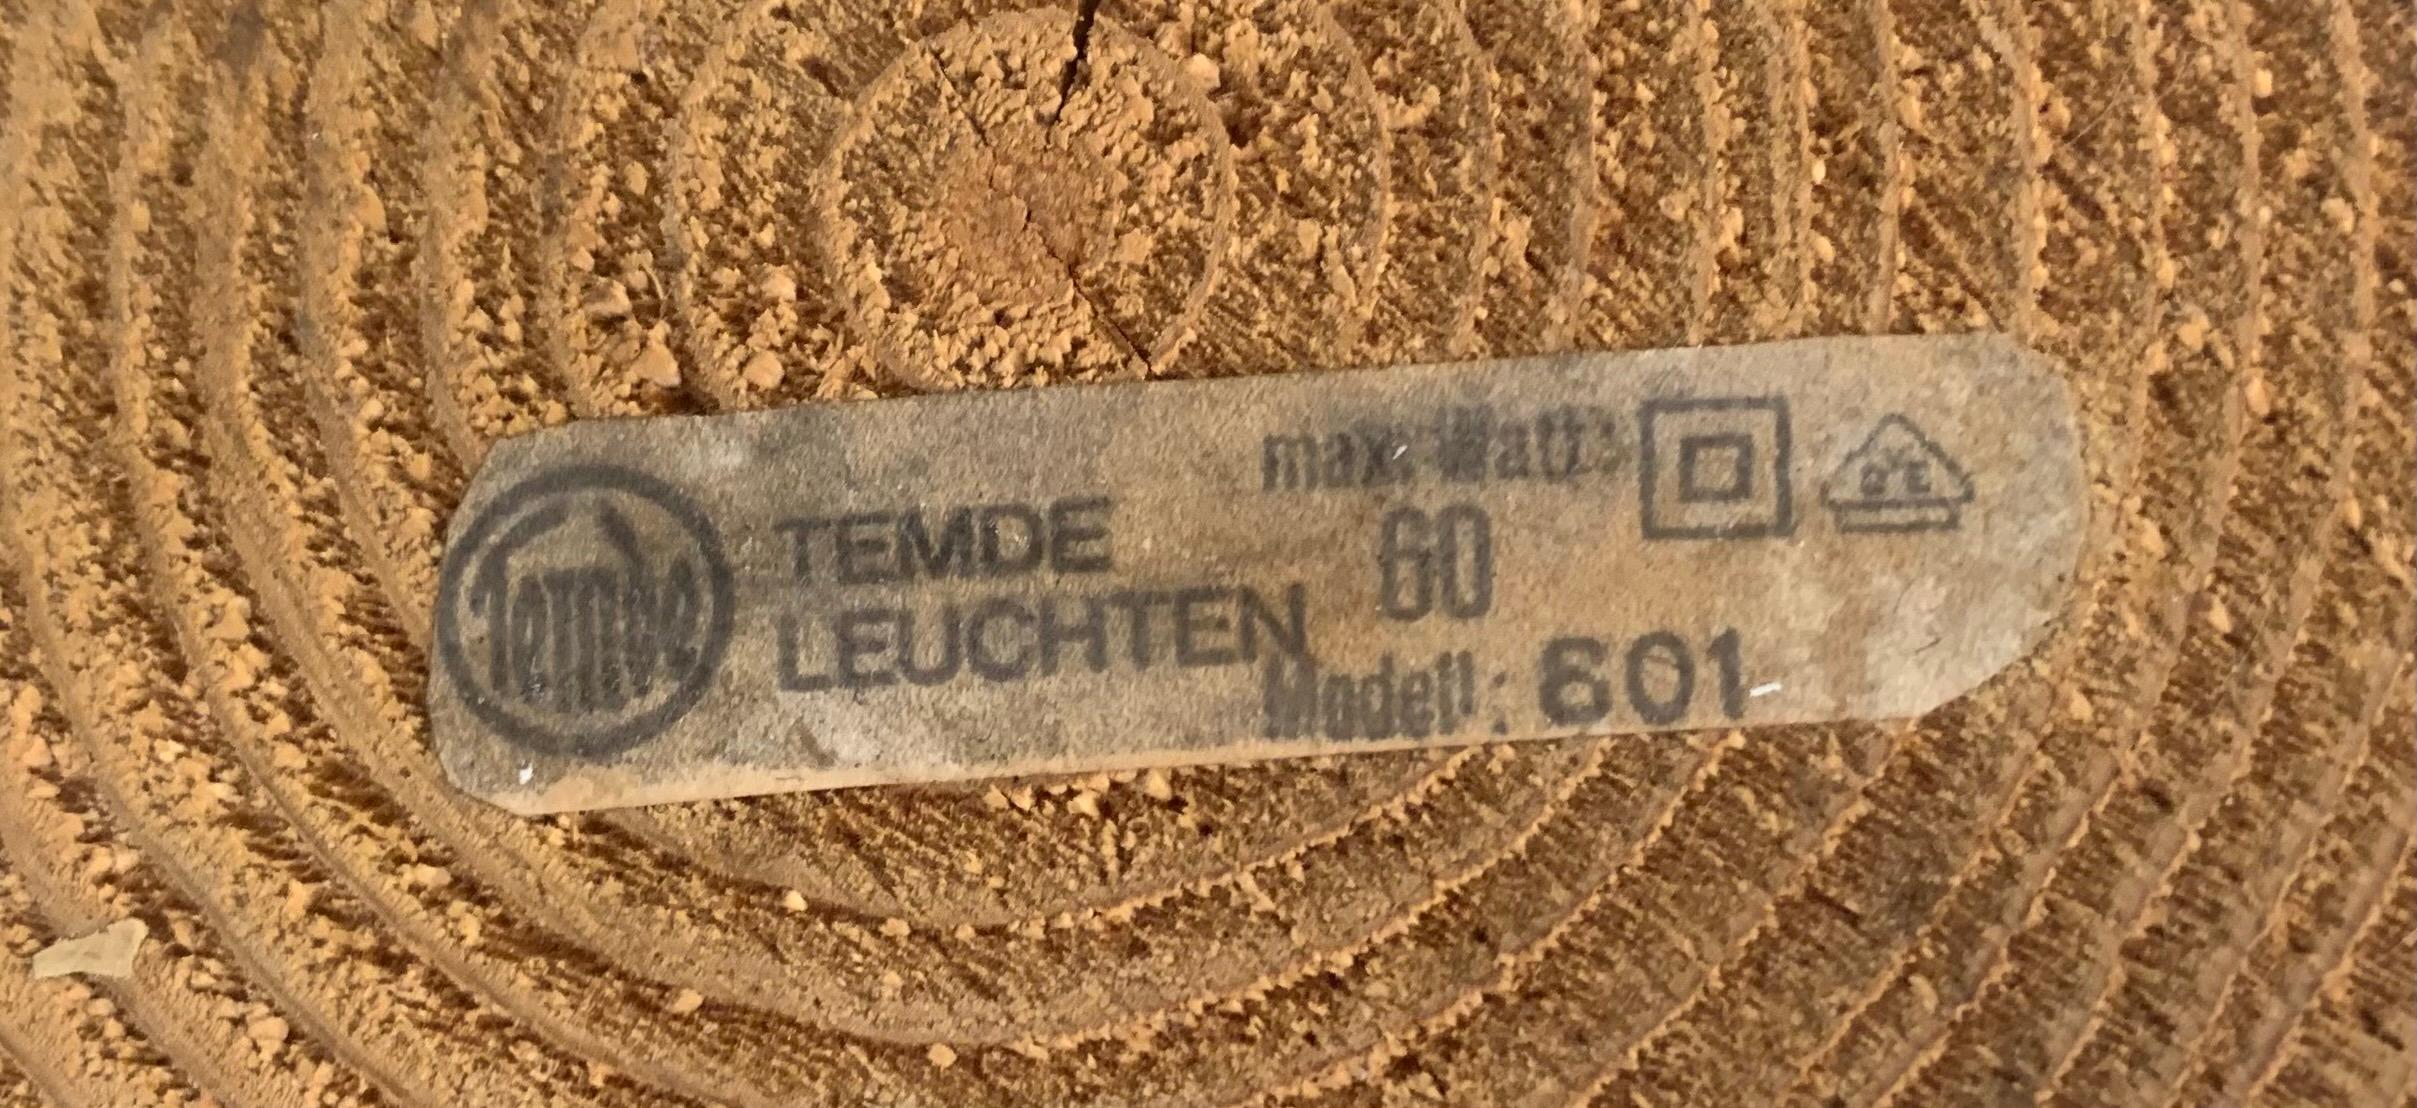 Wooden Table Lamp by Temde Leuchten, Germany, 1970s For Sale 3